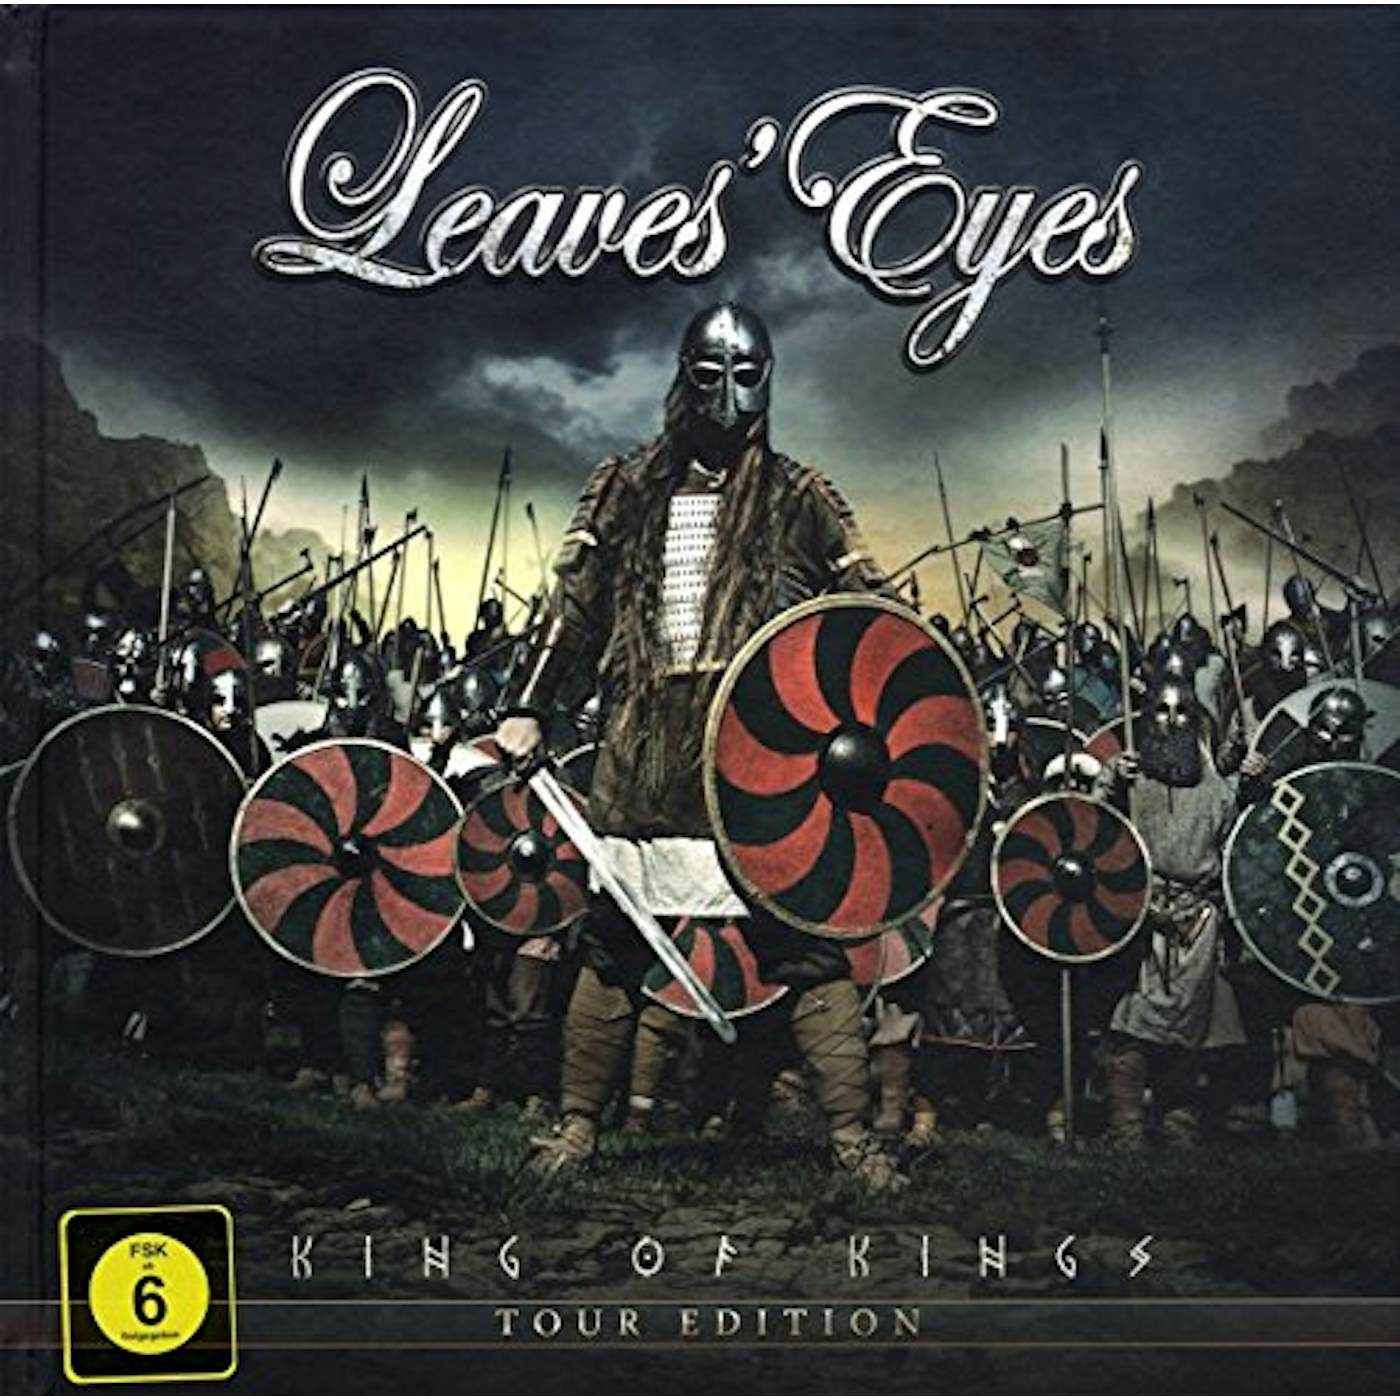 Leaves' Eyes KING OF KINGS (TOUR EDITION) CD